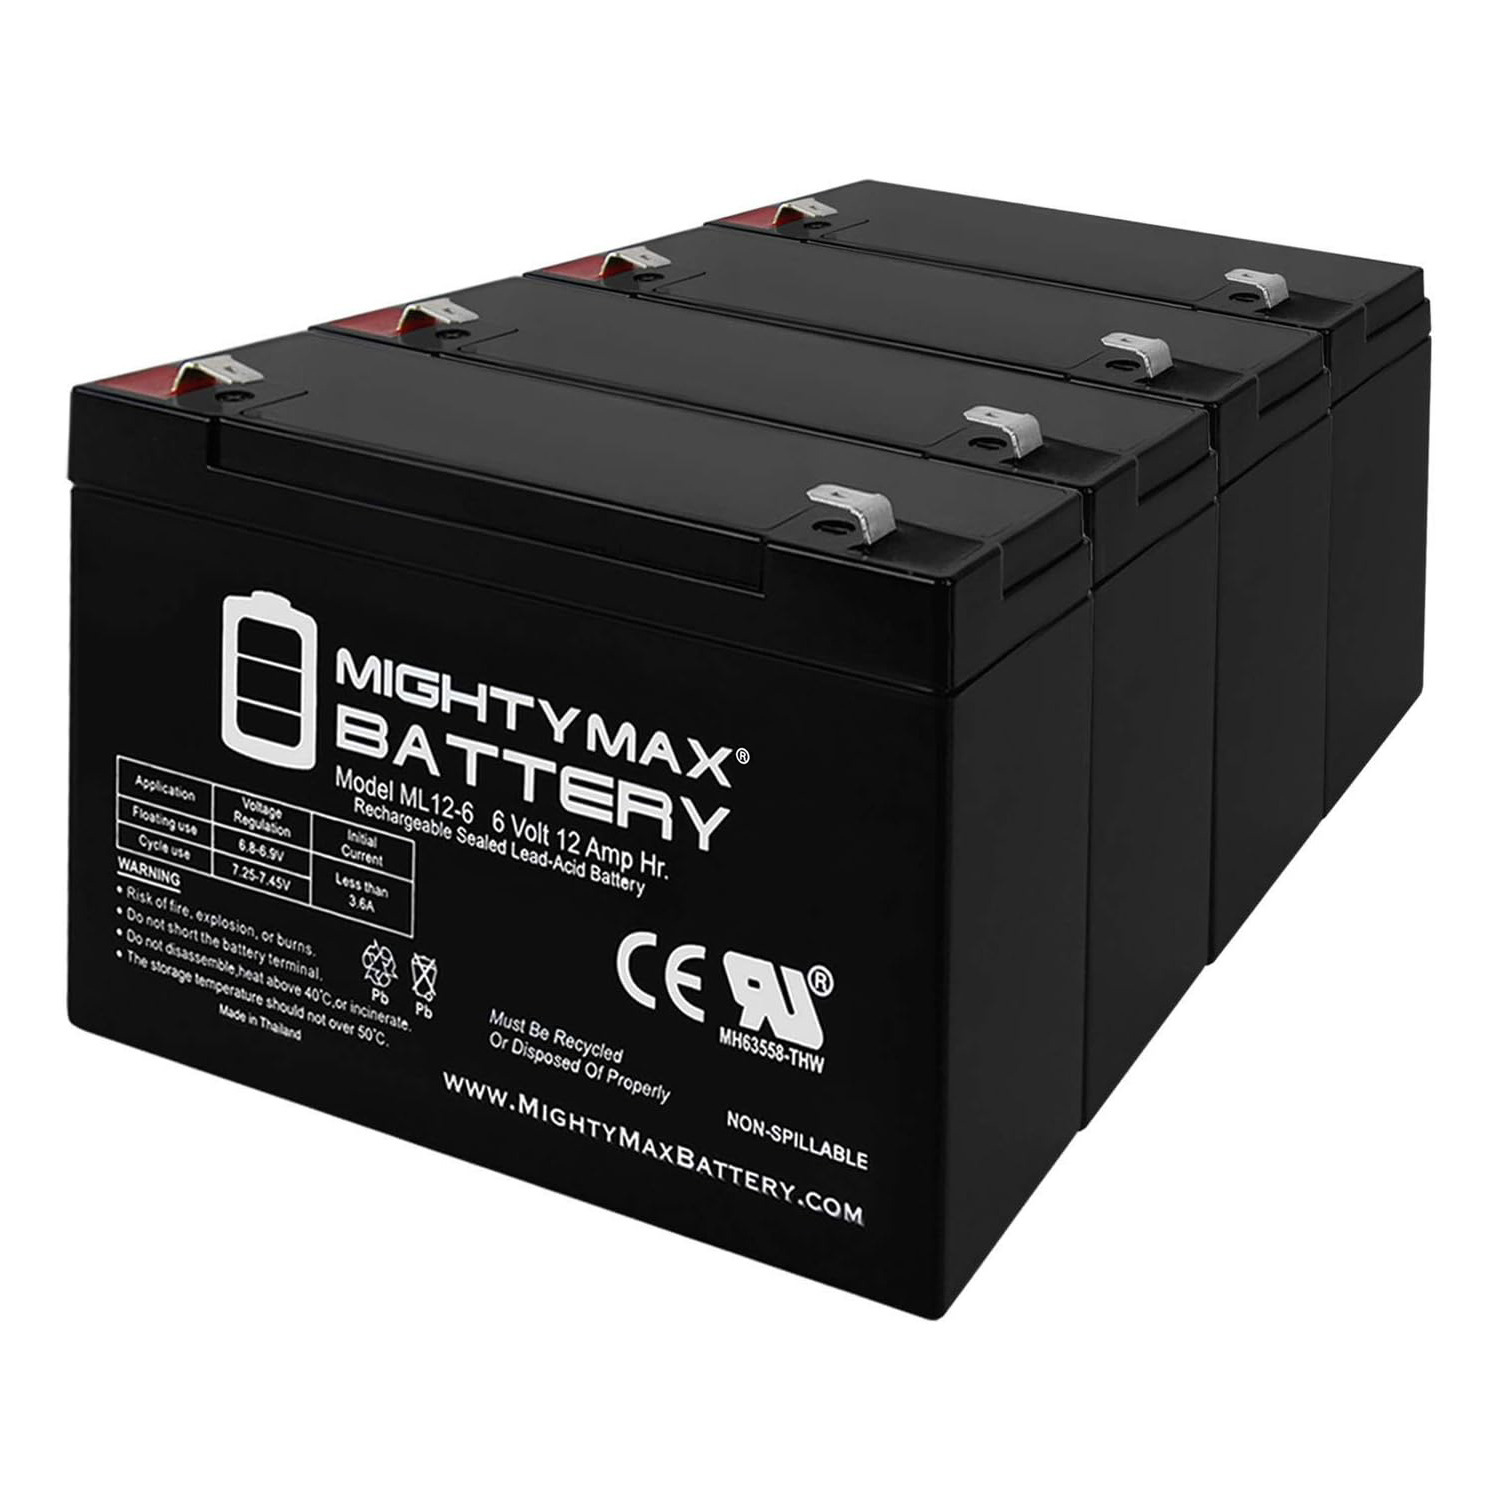 6V 12AH F2 Replacement Battery for Portalac GS PE10612 - 4 Pack